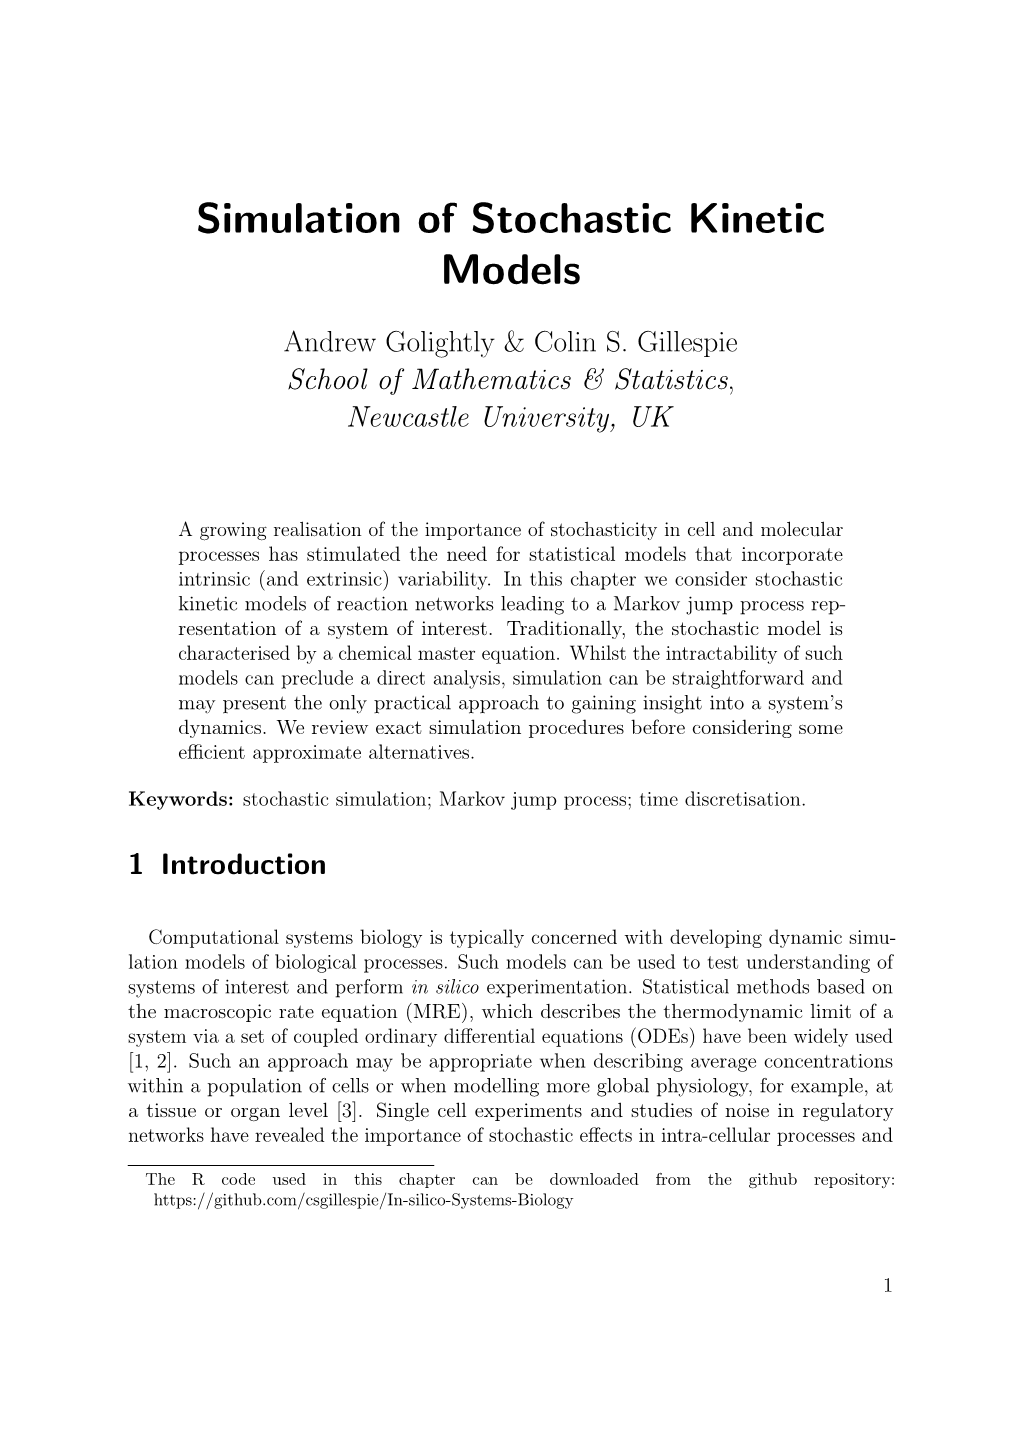 Simulation of Stochastic Kinetic Models